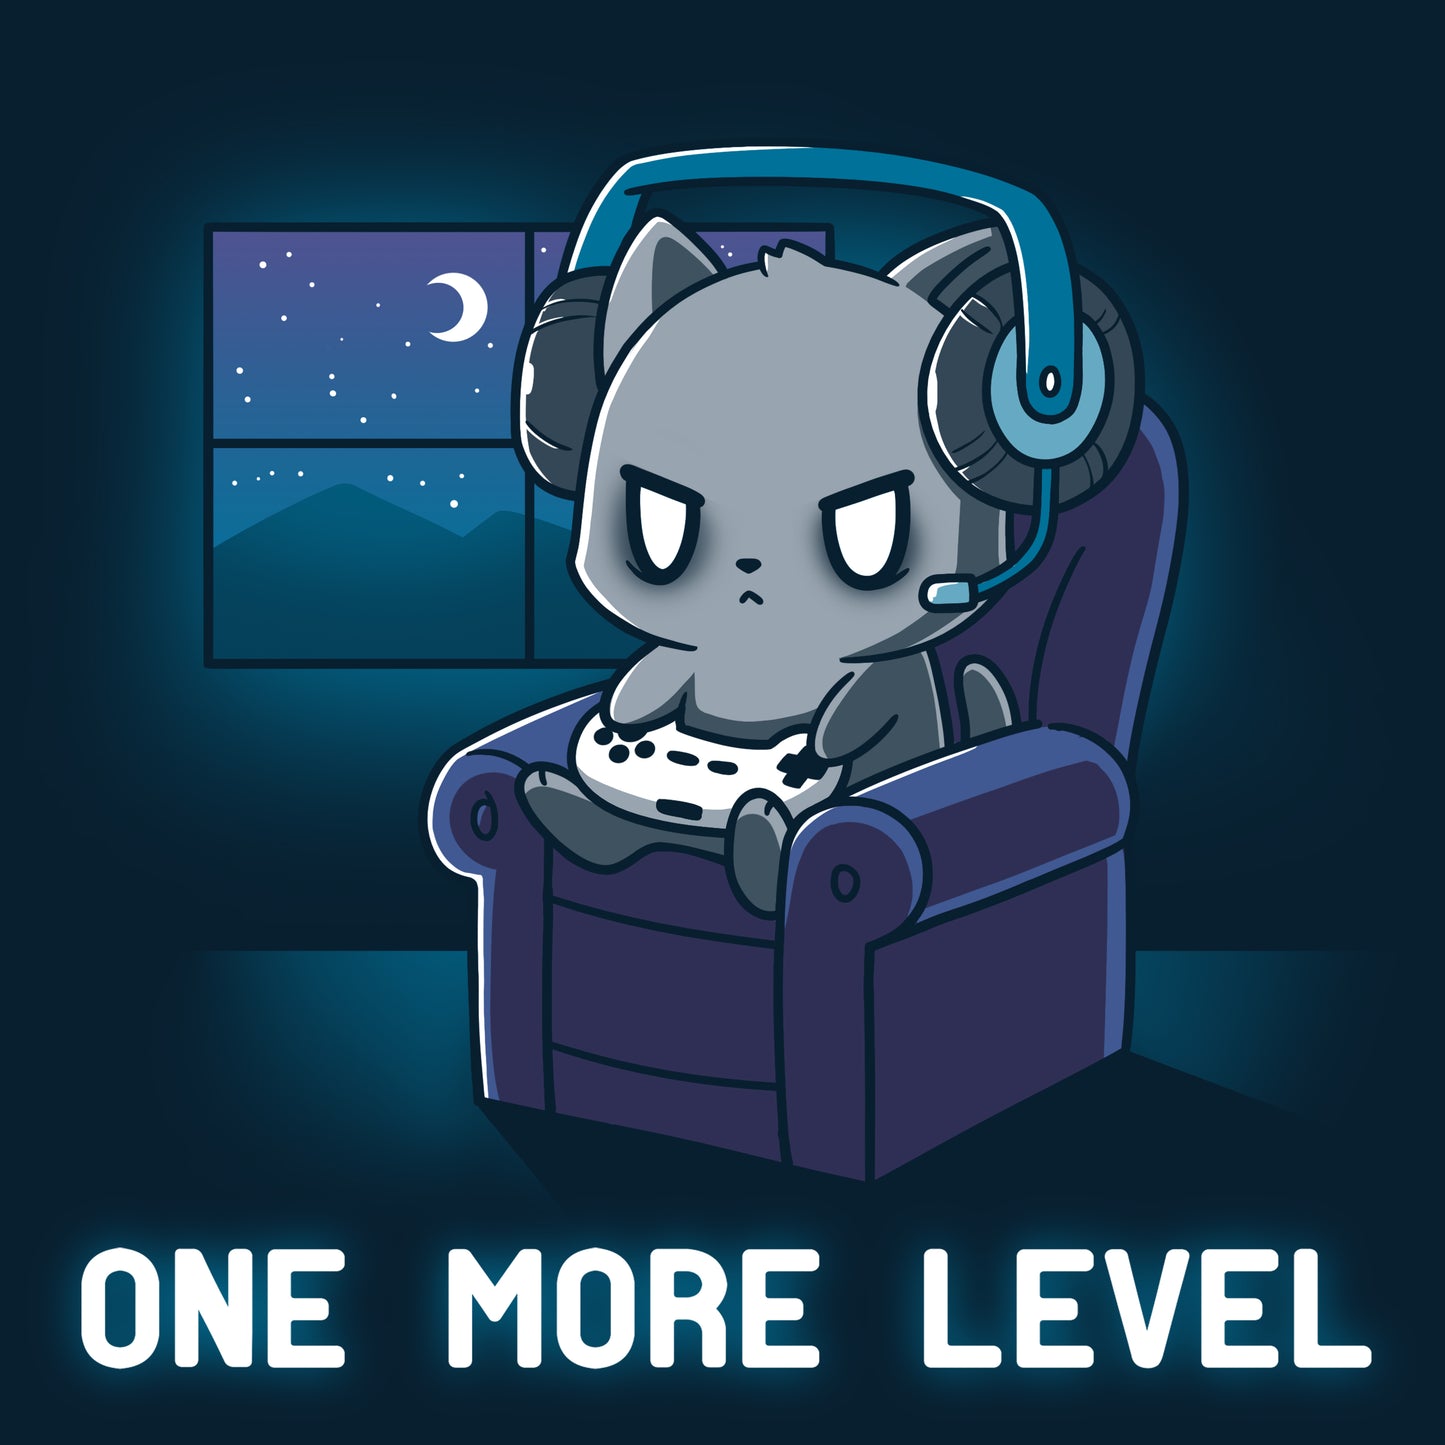 A Navy Blue One More Level t-shirt featuring a gamer cat sitting in a chair with headphones and the words one more level, made by TeeTurtle.